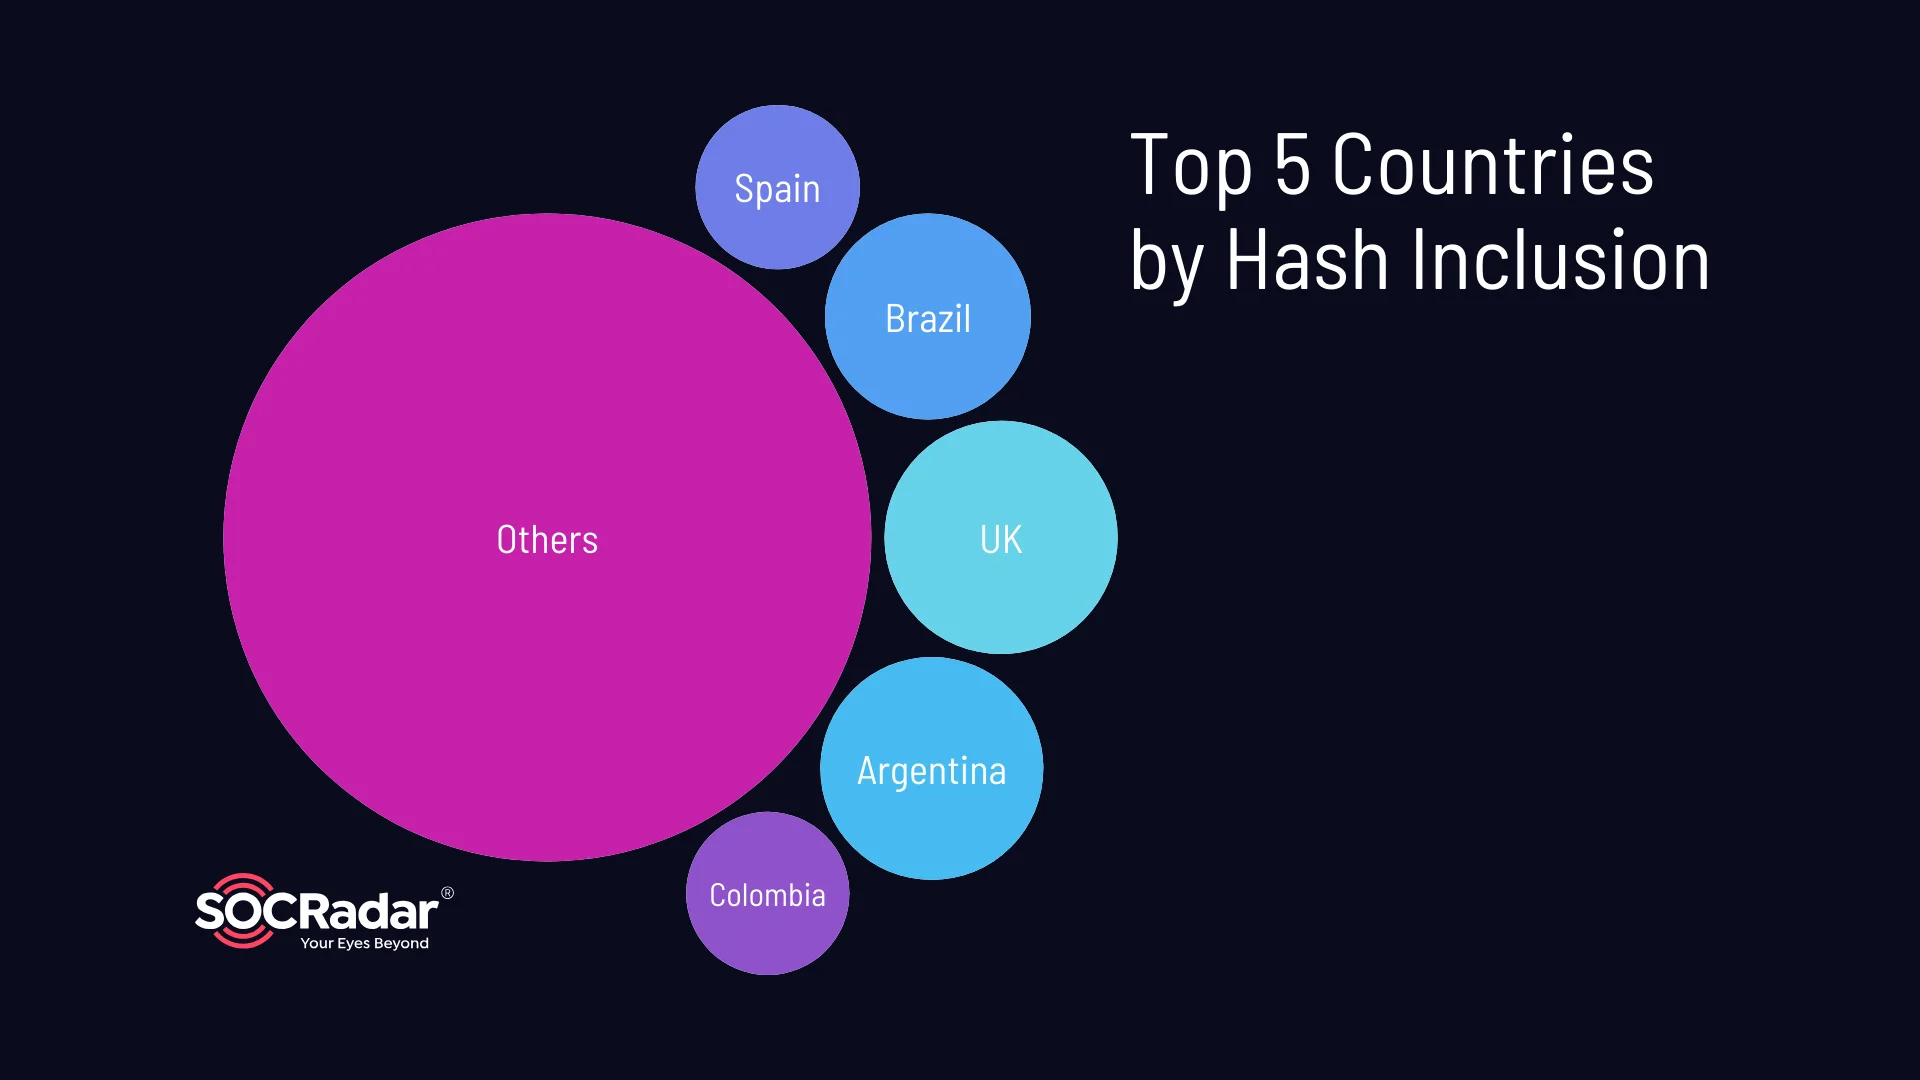 Top 5 countries by hash inclusion